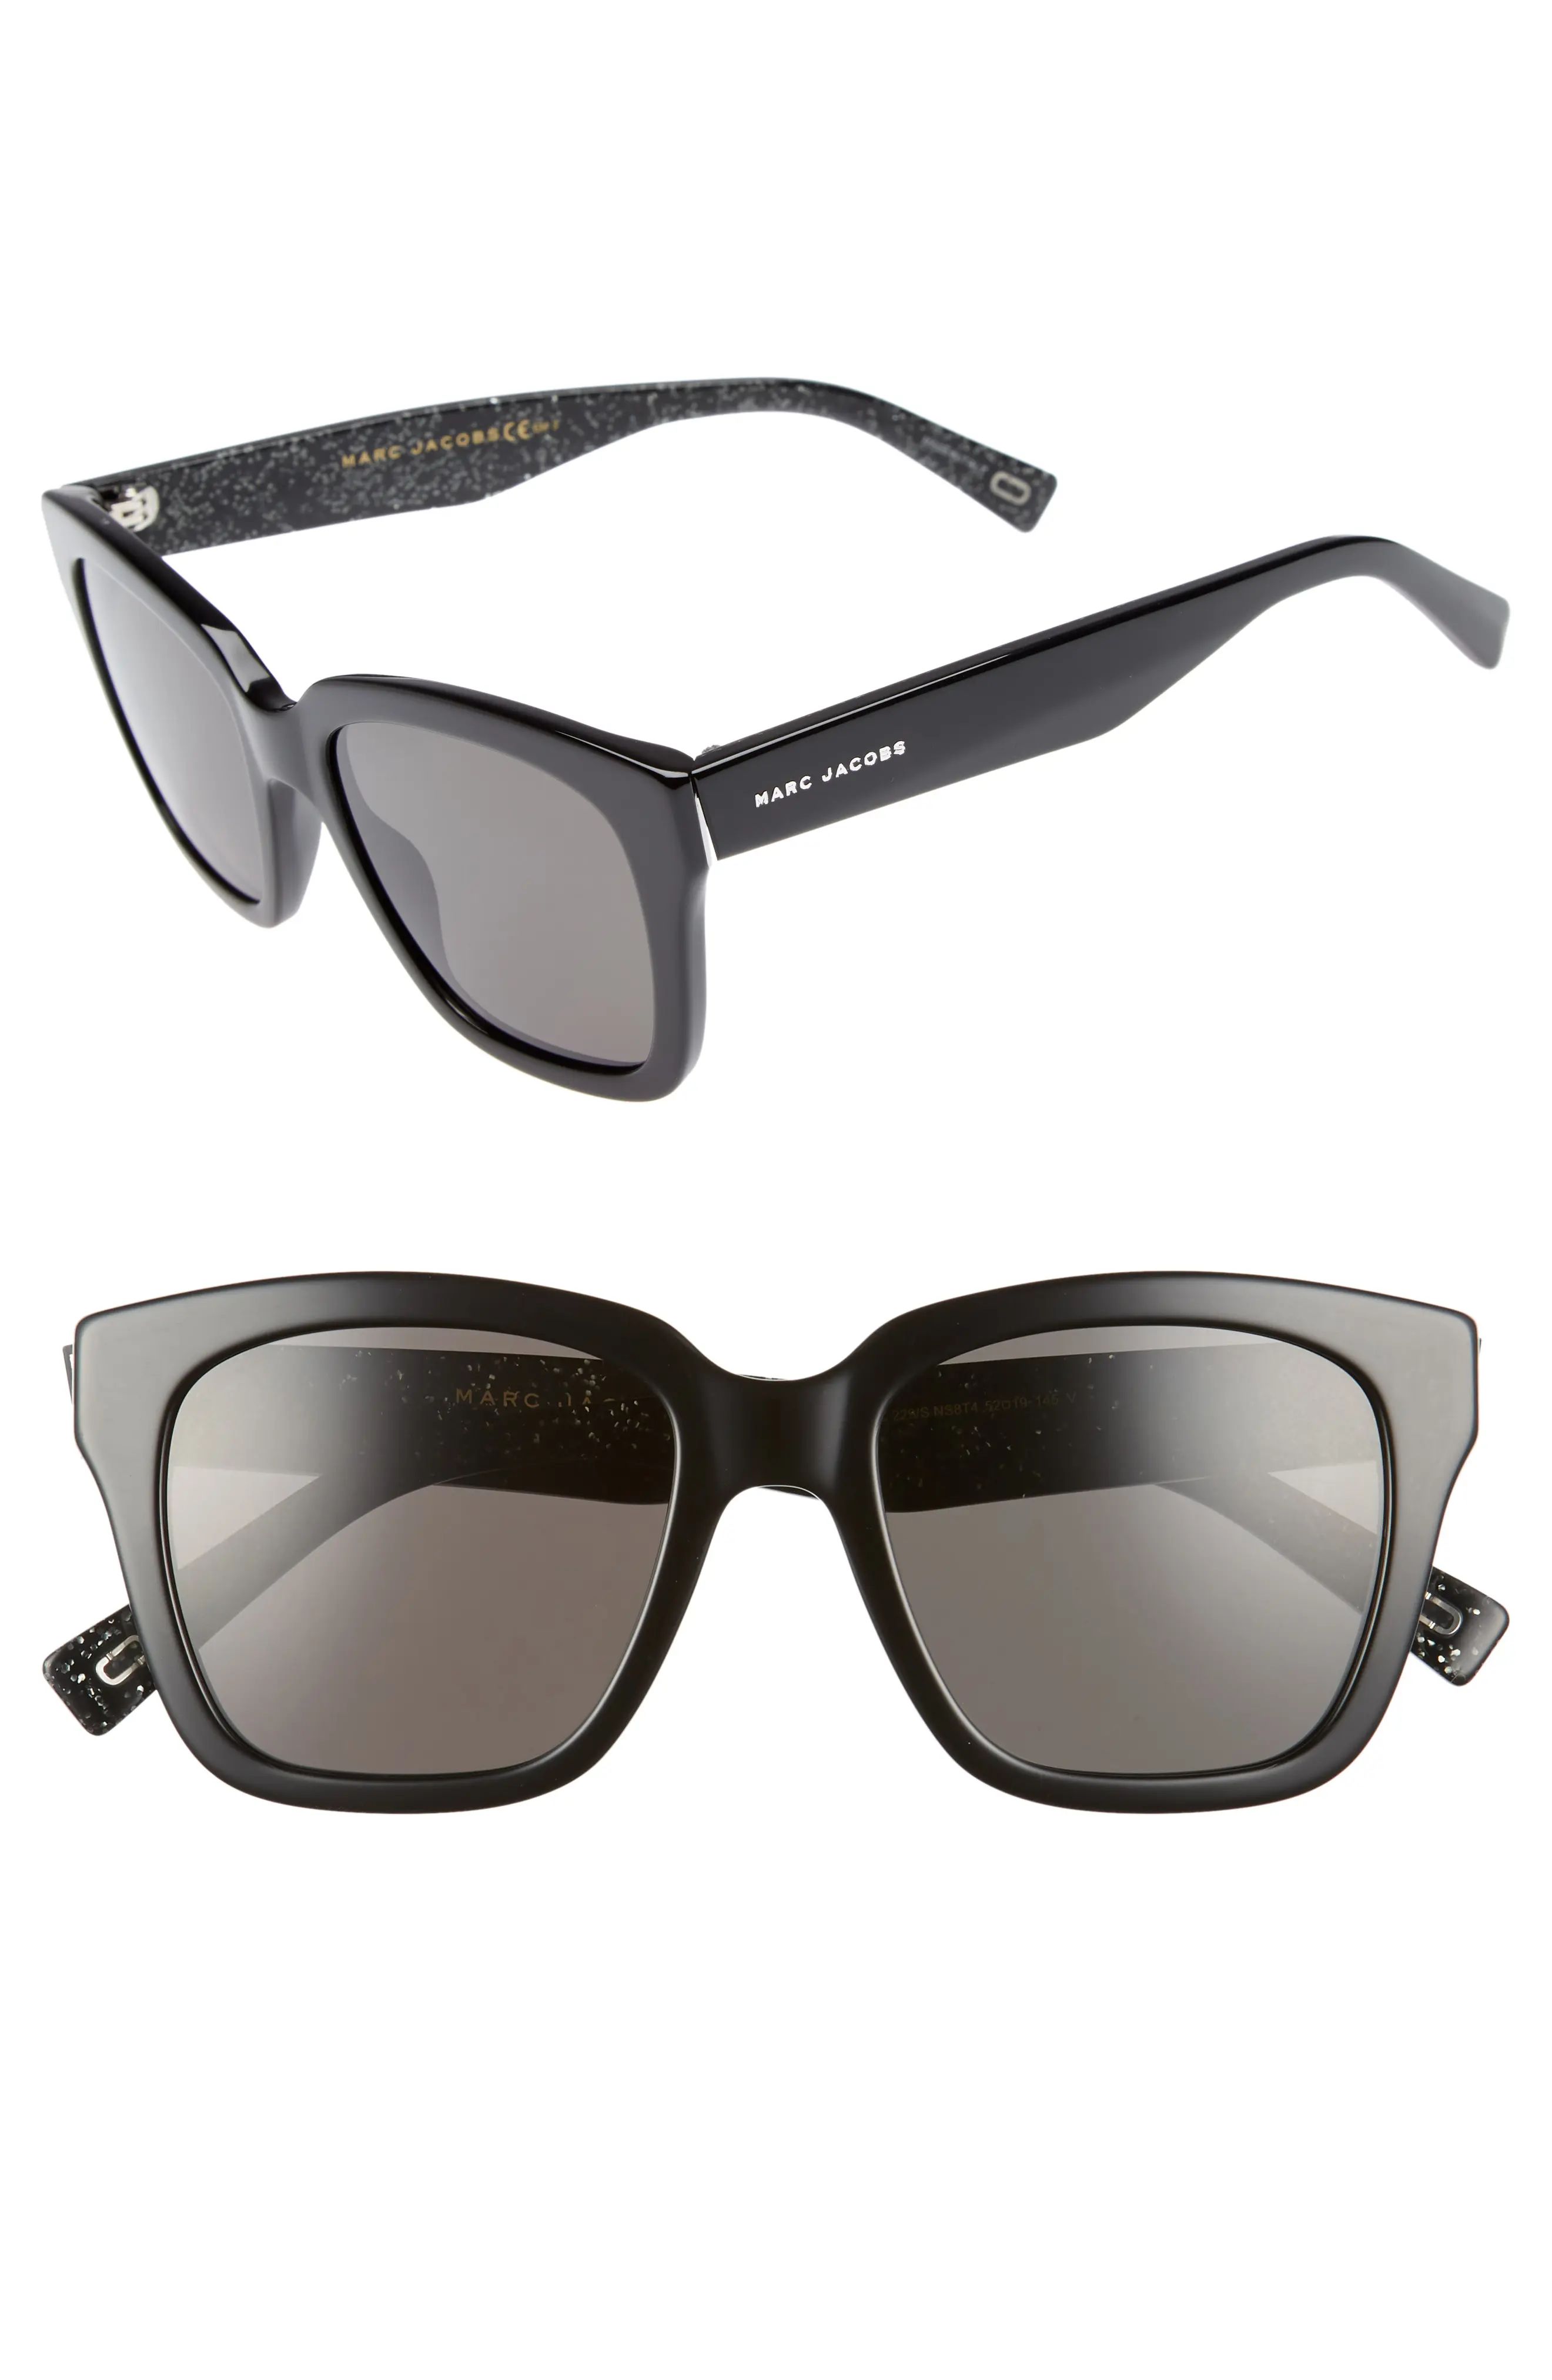 MARC JACOBS 52mm Square Polarized Sunglasses | Nordstrom